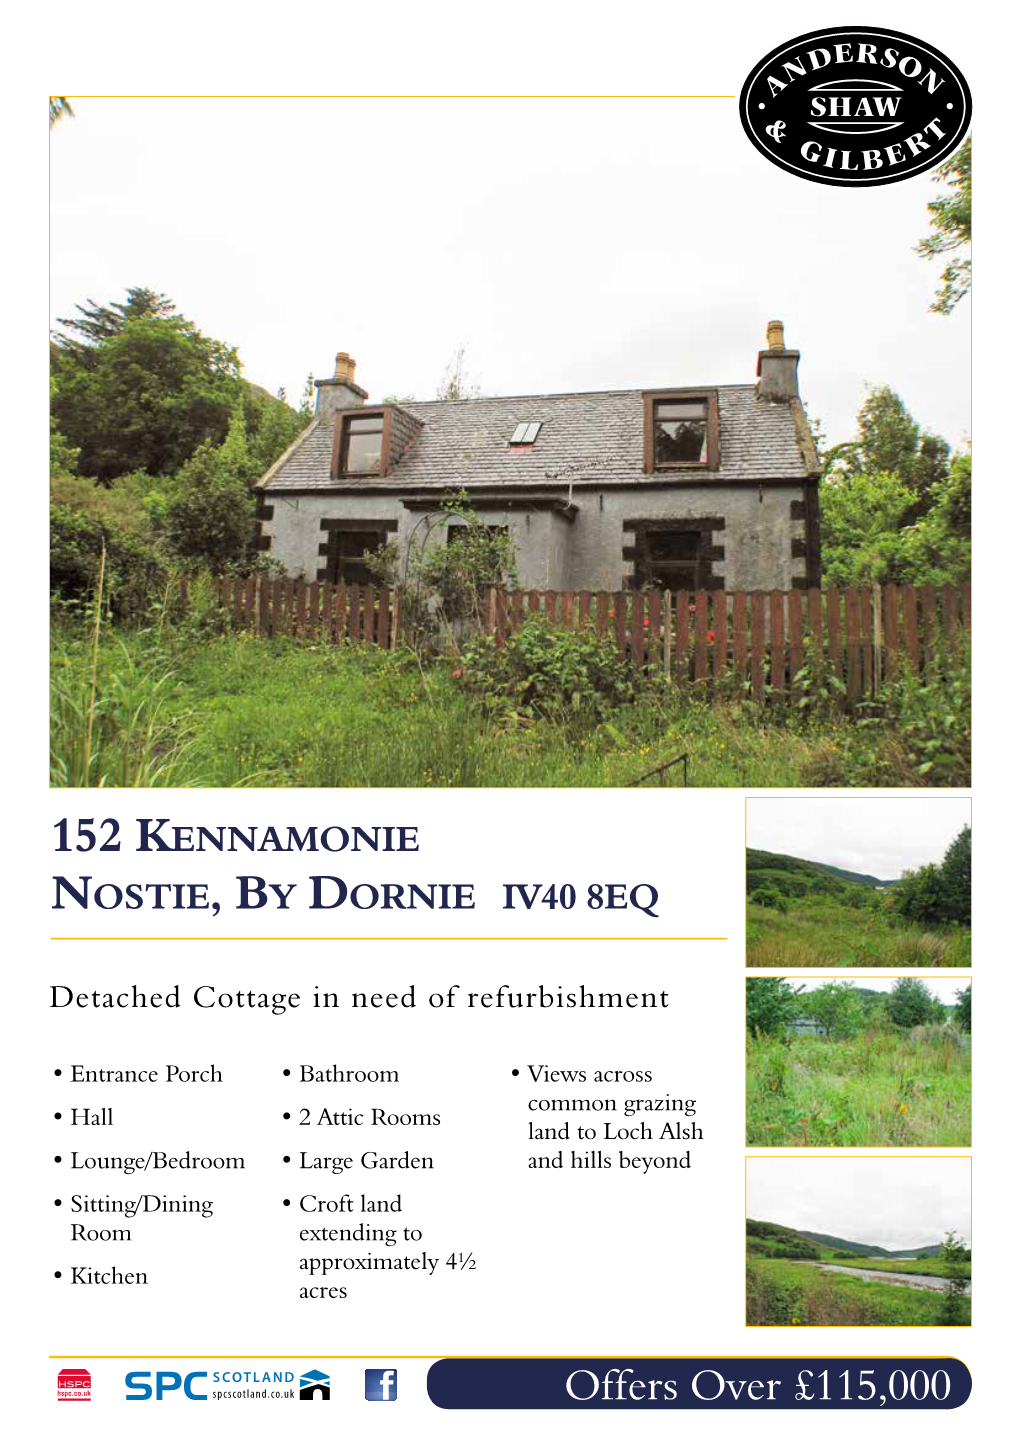 Offers Over £115,000 DESCRIPTION This Is a Unique Opportunity to Acquire a Traditional Detached Daring Climb One of the Magnificent Five Sisters of Kintail